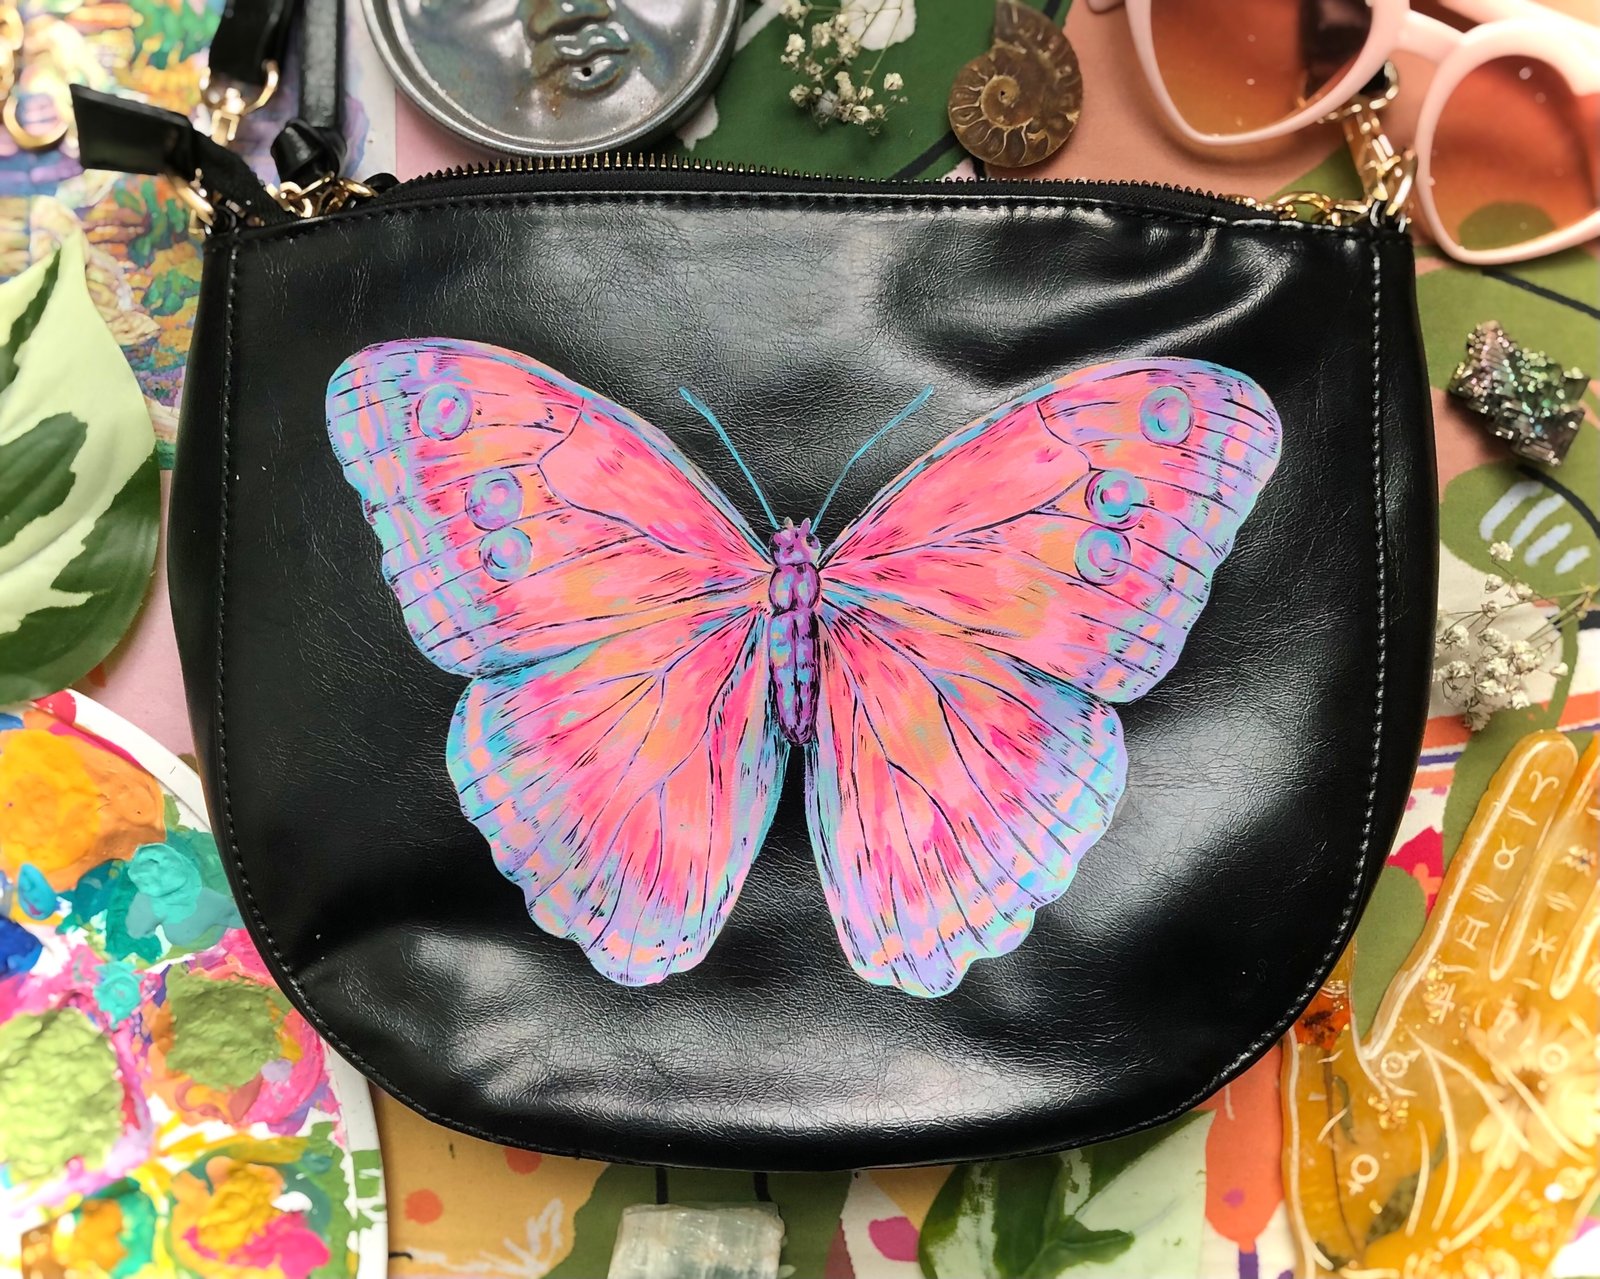 Hand-painted Blooms Leather Bag FINAL SALE (No Returns)